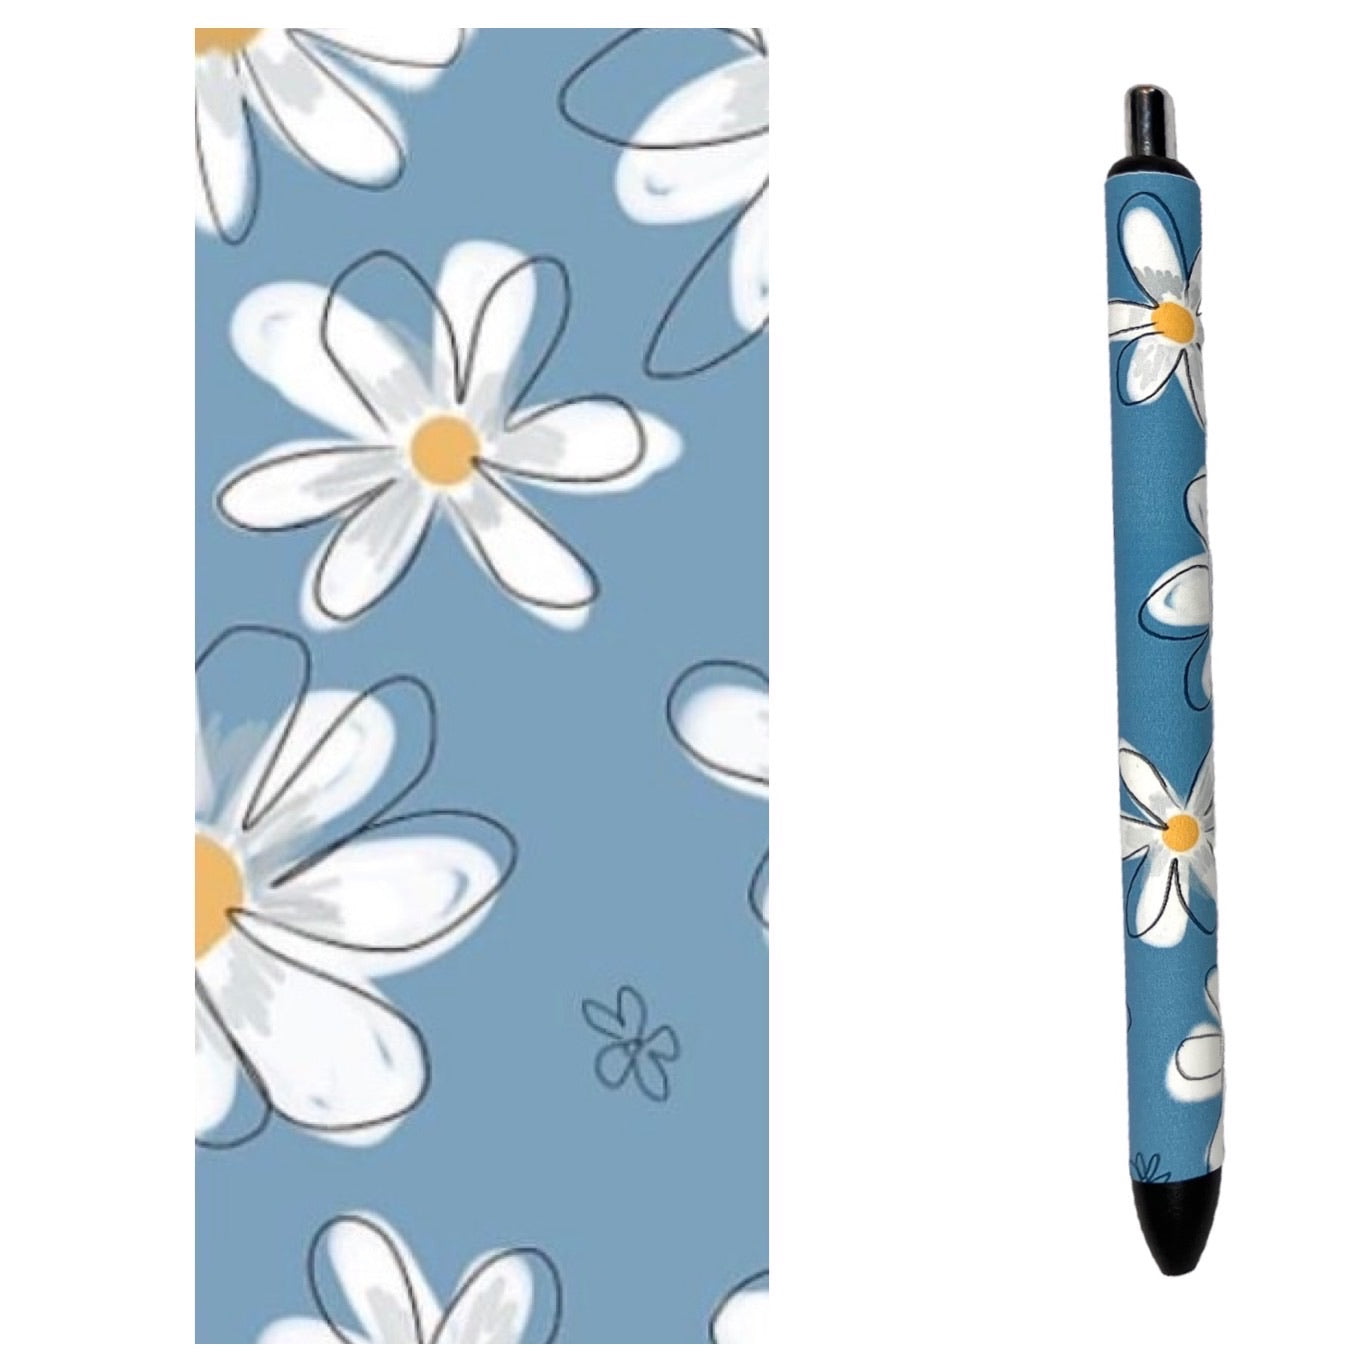 Photo of pen and design wrap with blue background and white doodle flowers 